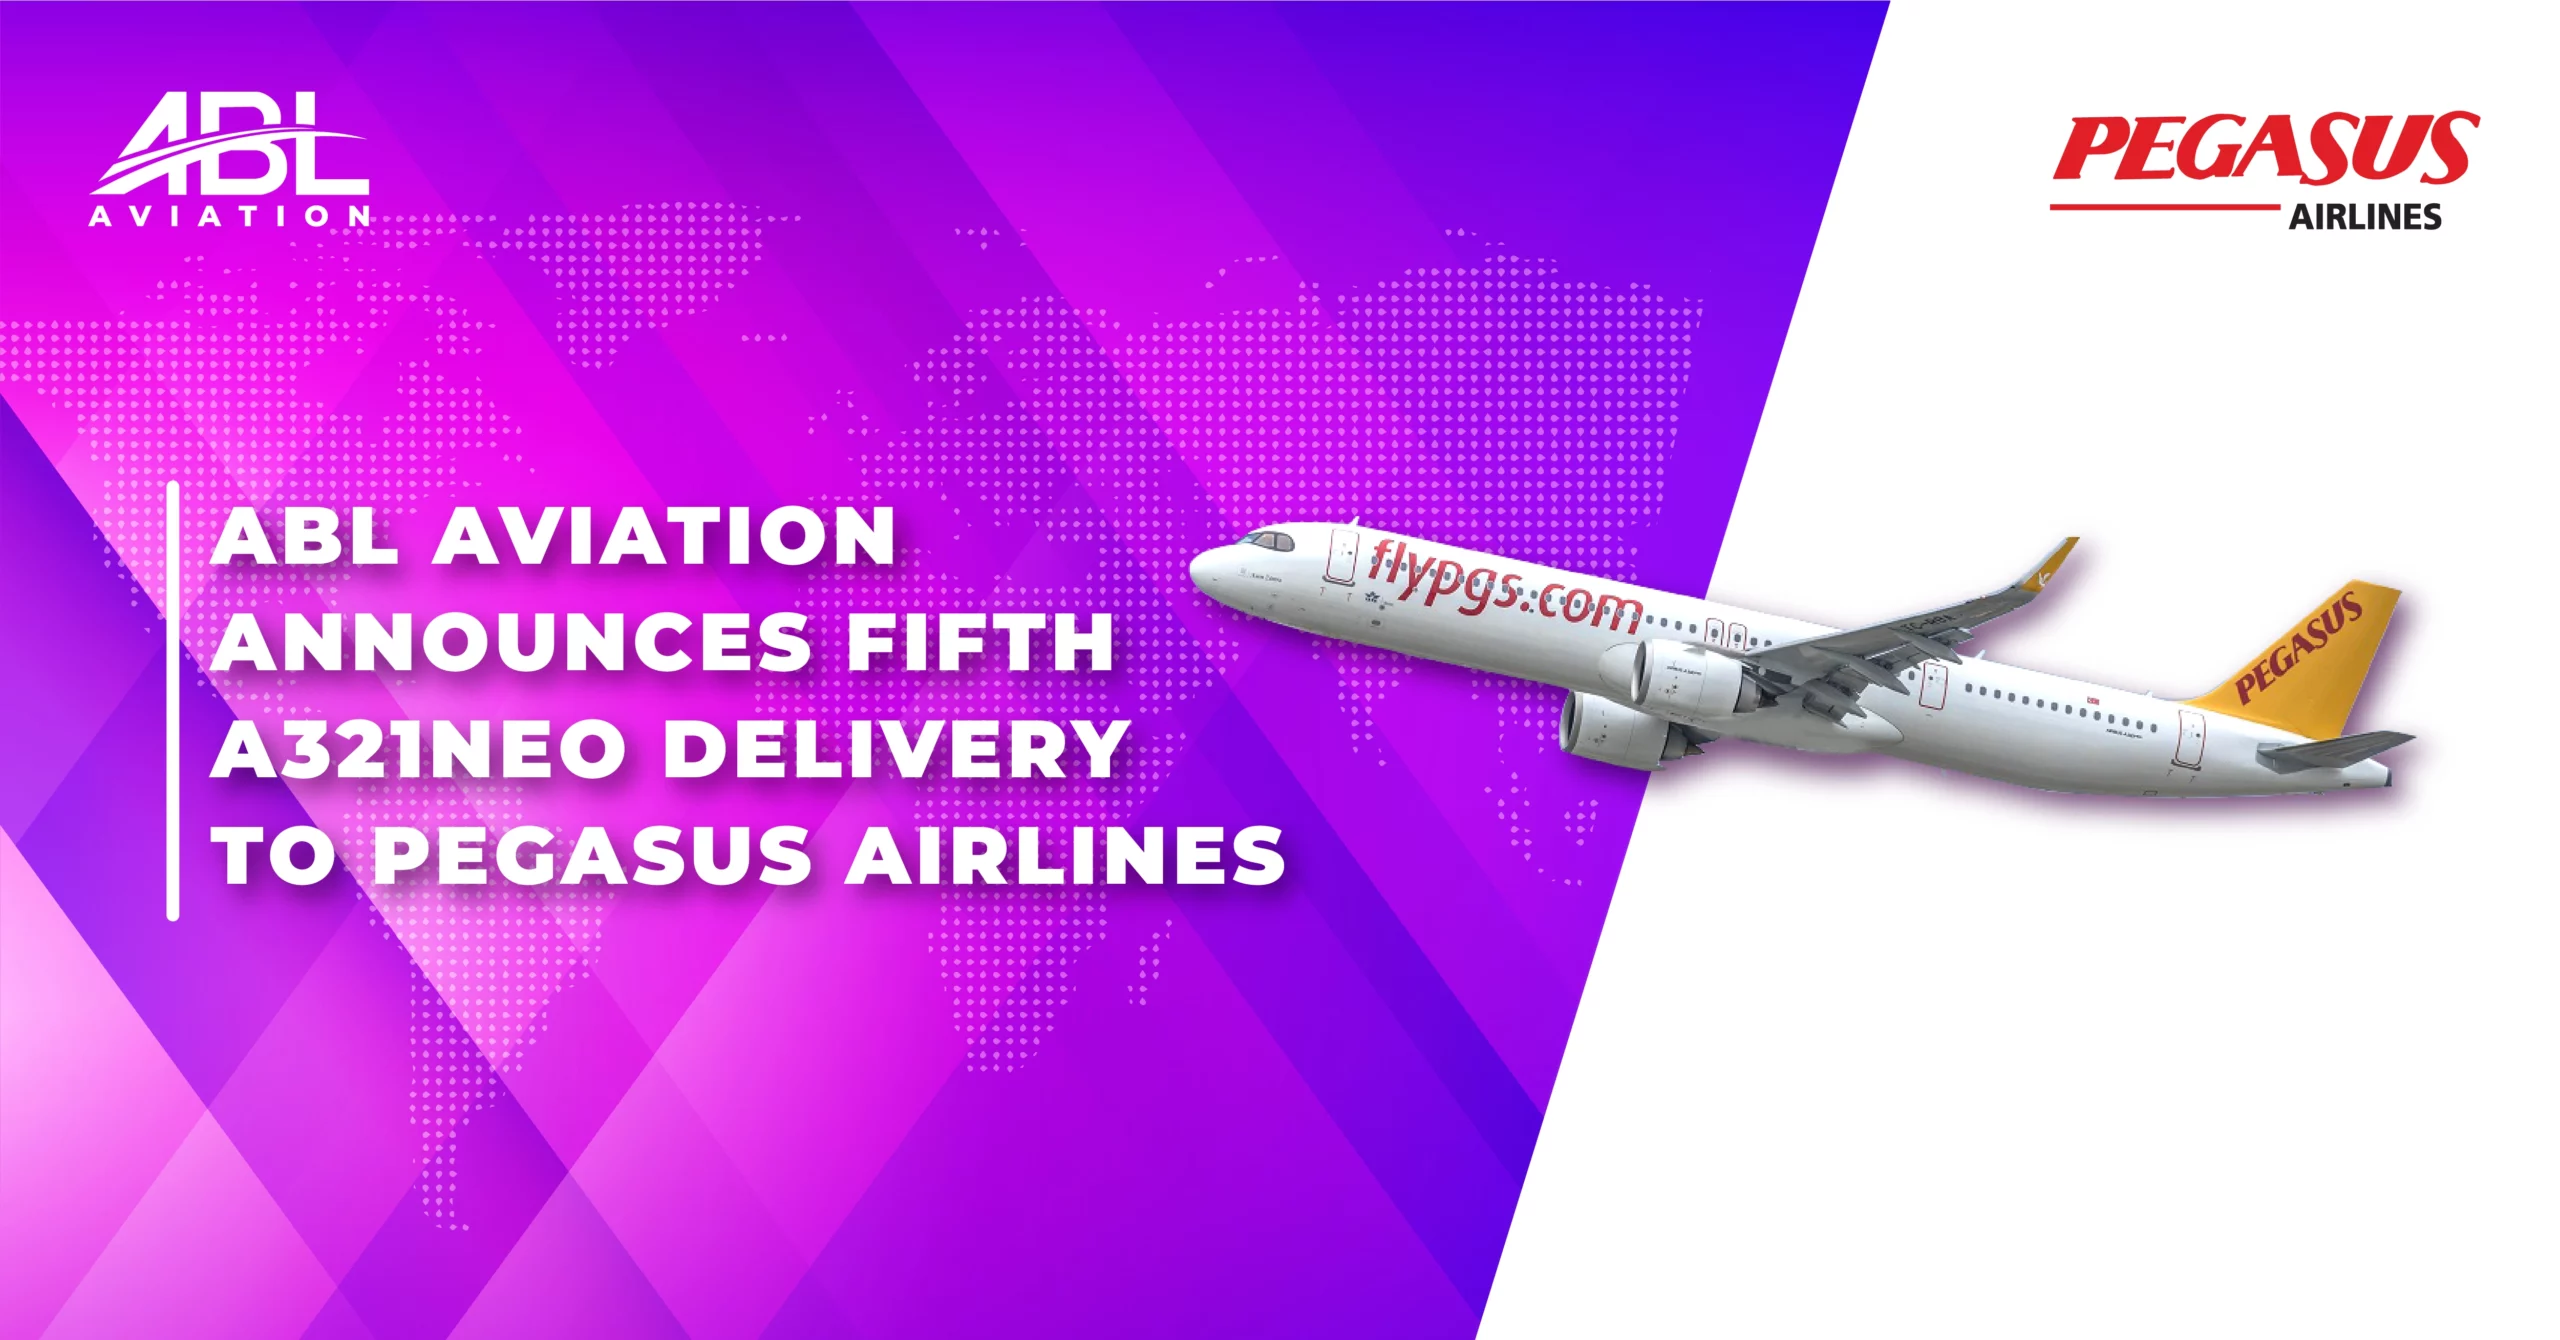 ABL Aviation Announces Fifth A321NEO Delivery To Pegasus Airlines, With Two More Deliveries Planned This Year